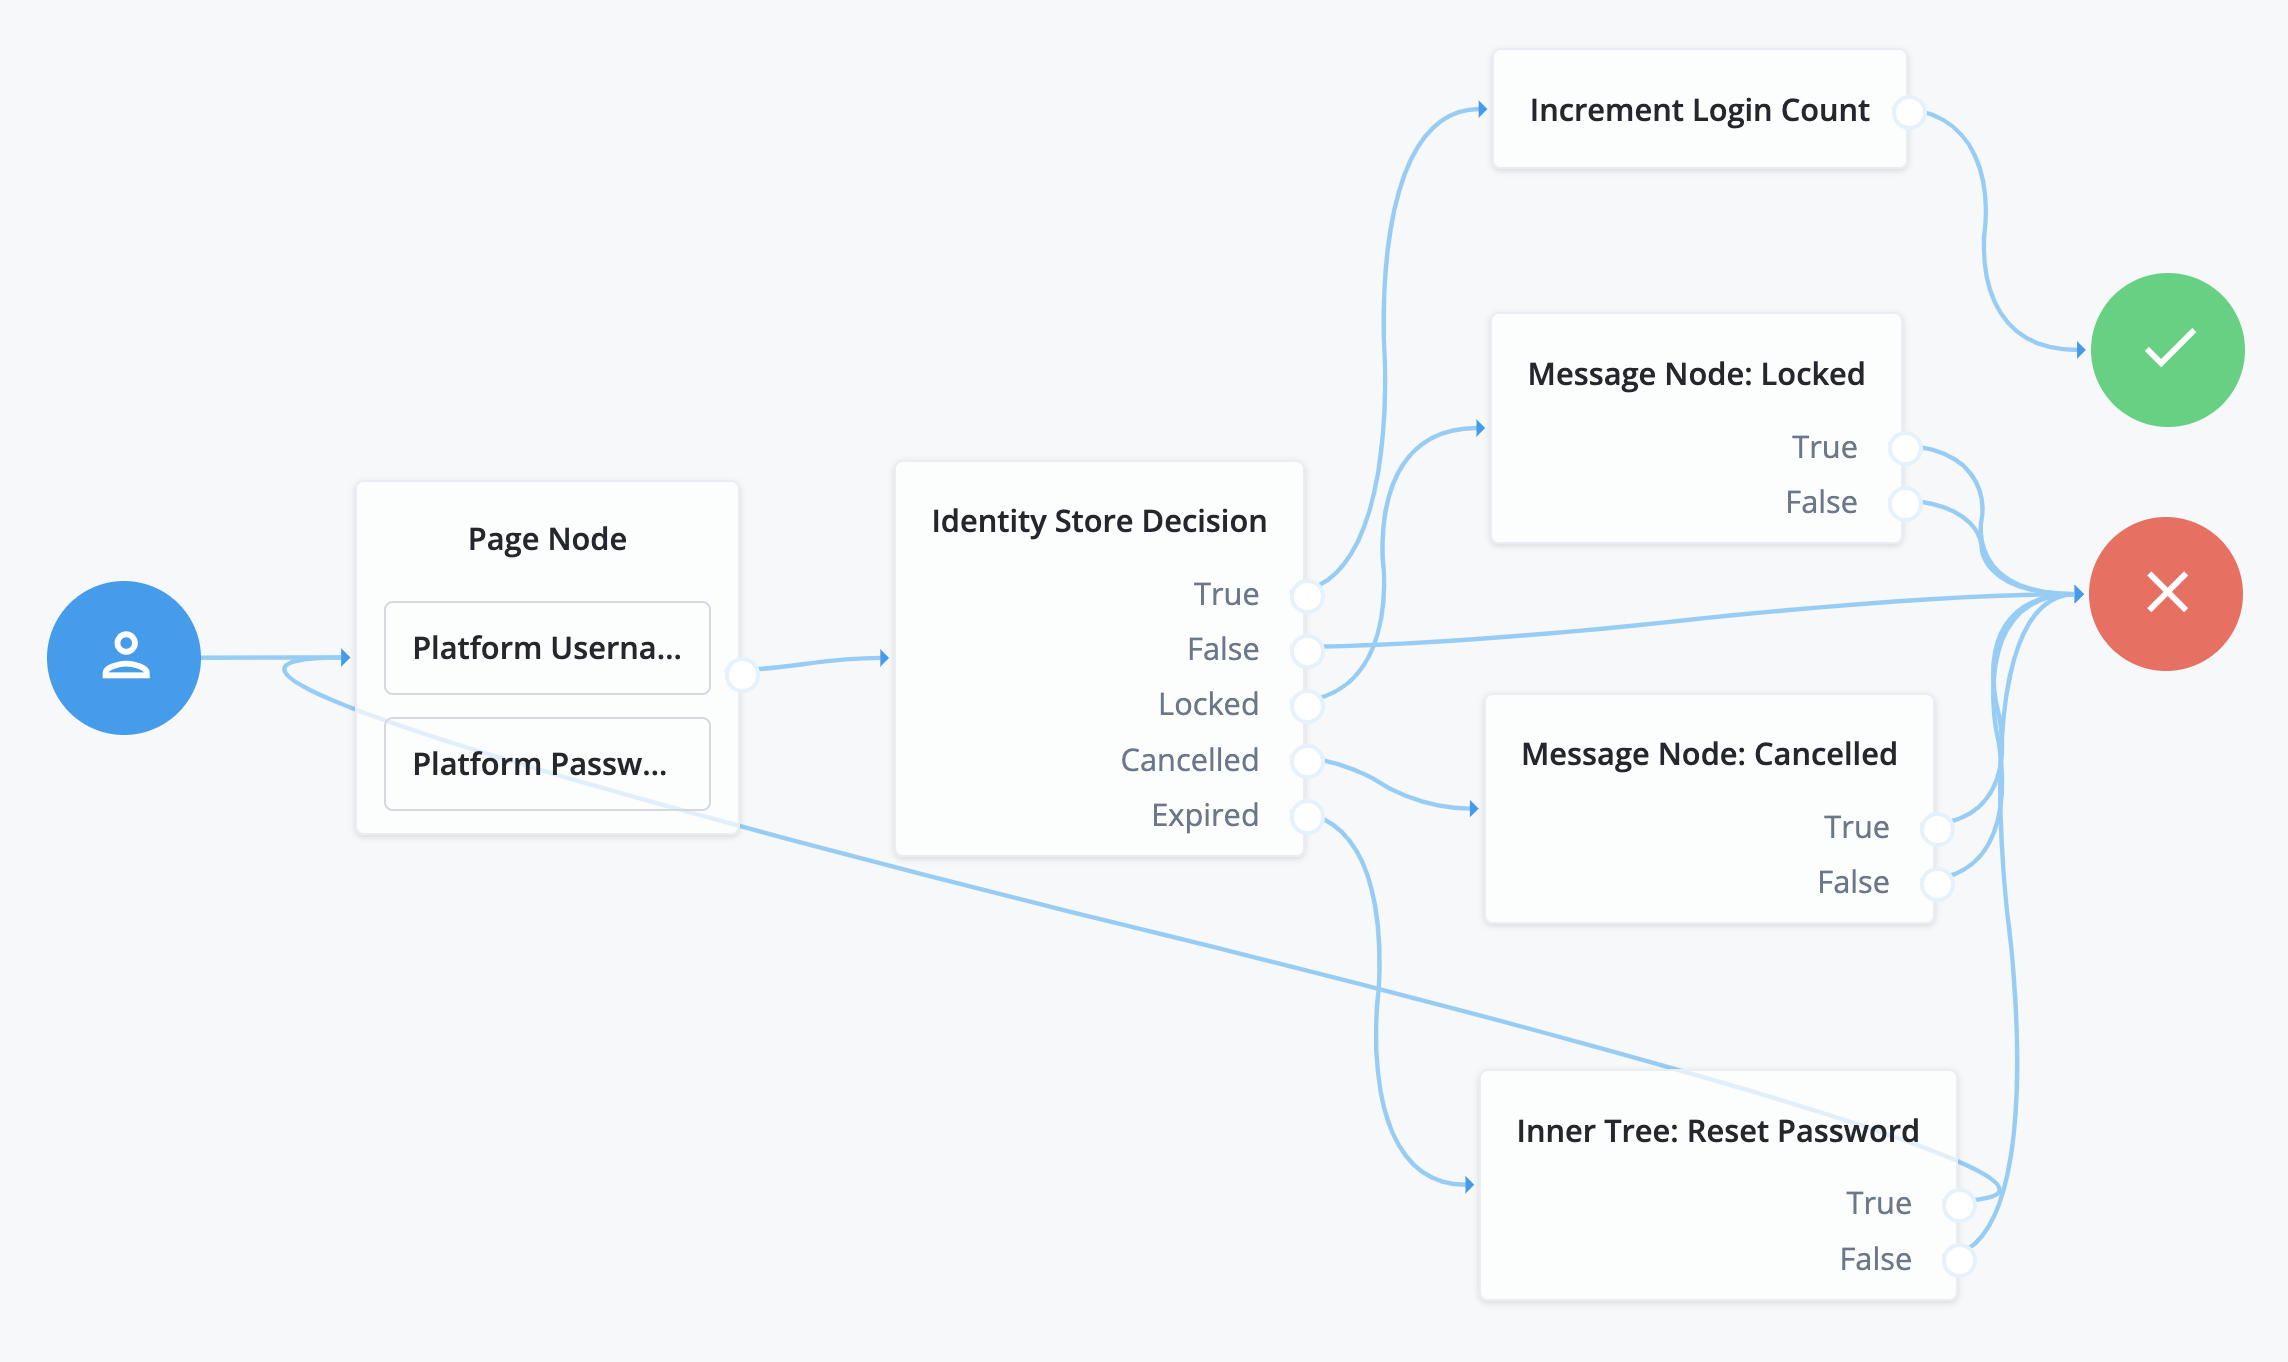 The Identity Store Decision node in context